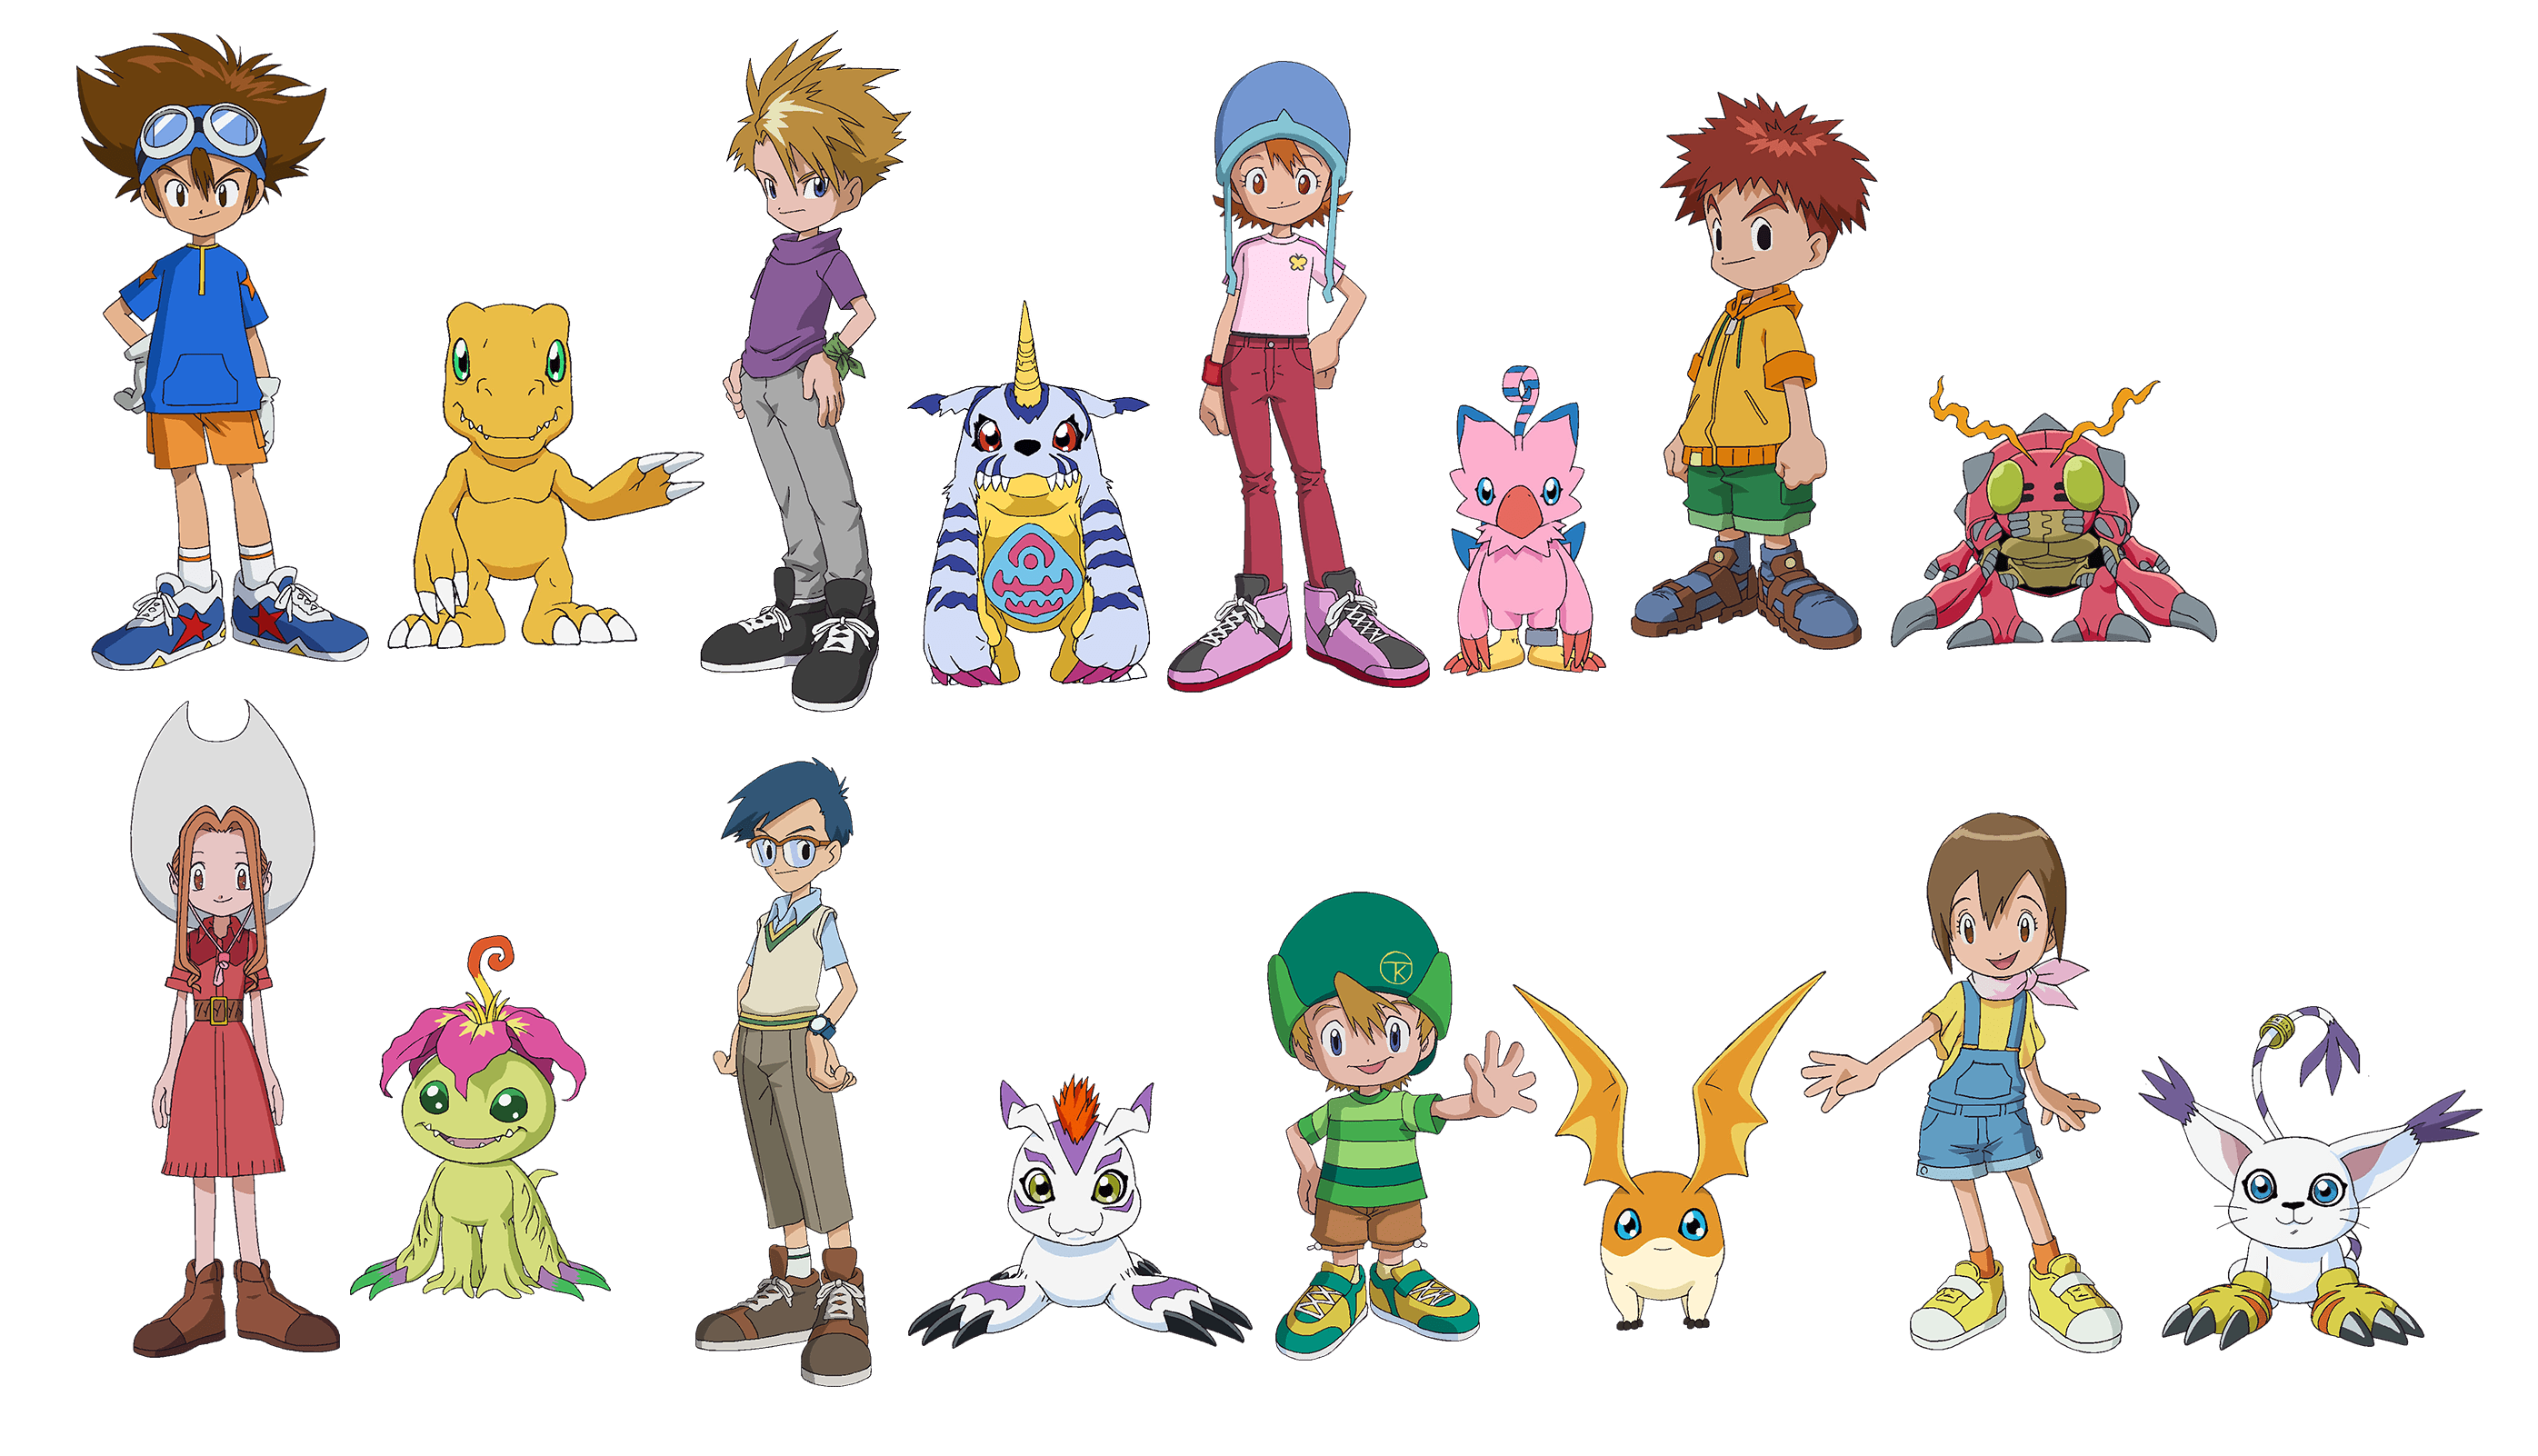 Digimon Adventure (2020) to start airing on April 5th First Trailer.